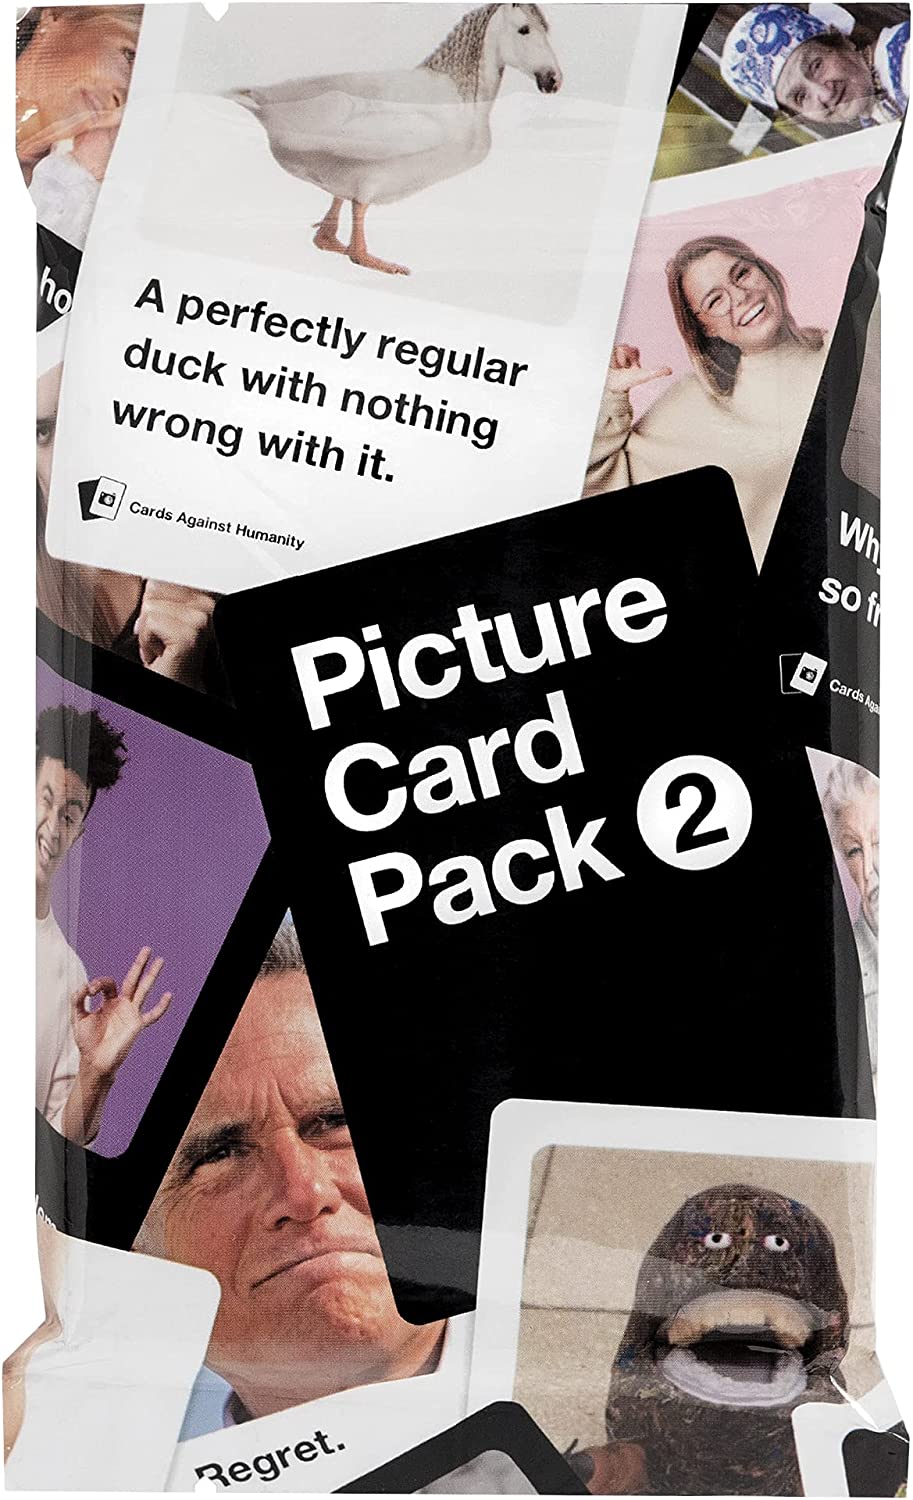 Cards Against Humanity: Picture Card Pack 2 $3.75 + Free Shipping w/ Prime or on orders over $25